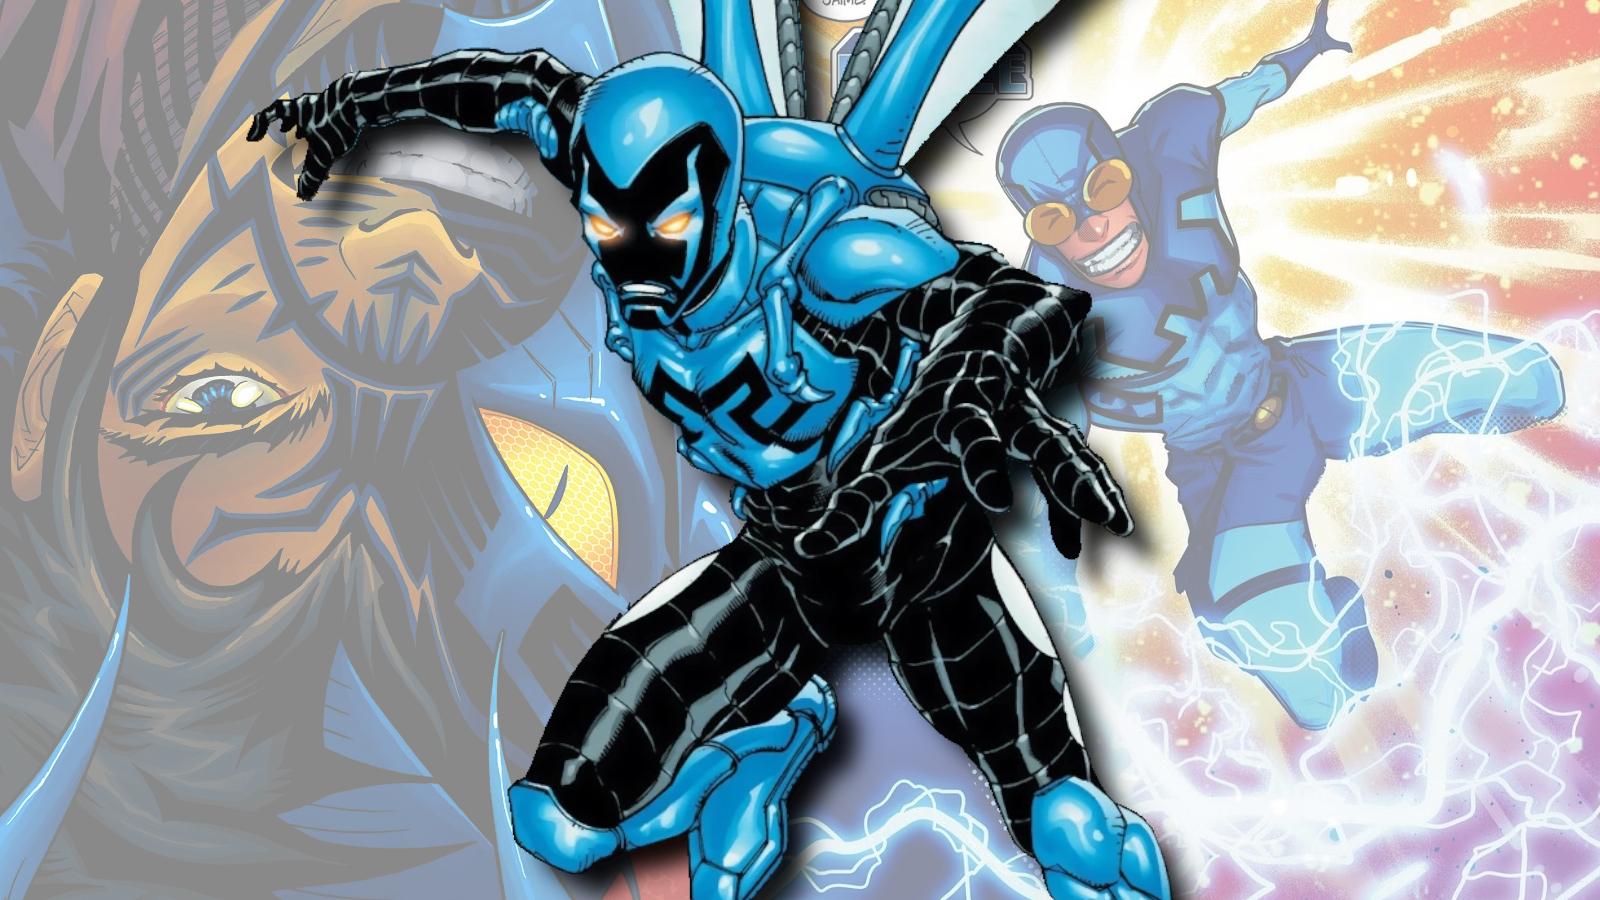 Blue Beetle throughout the years